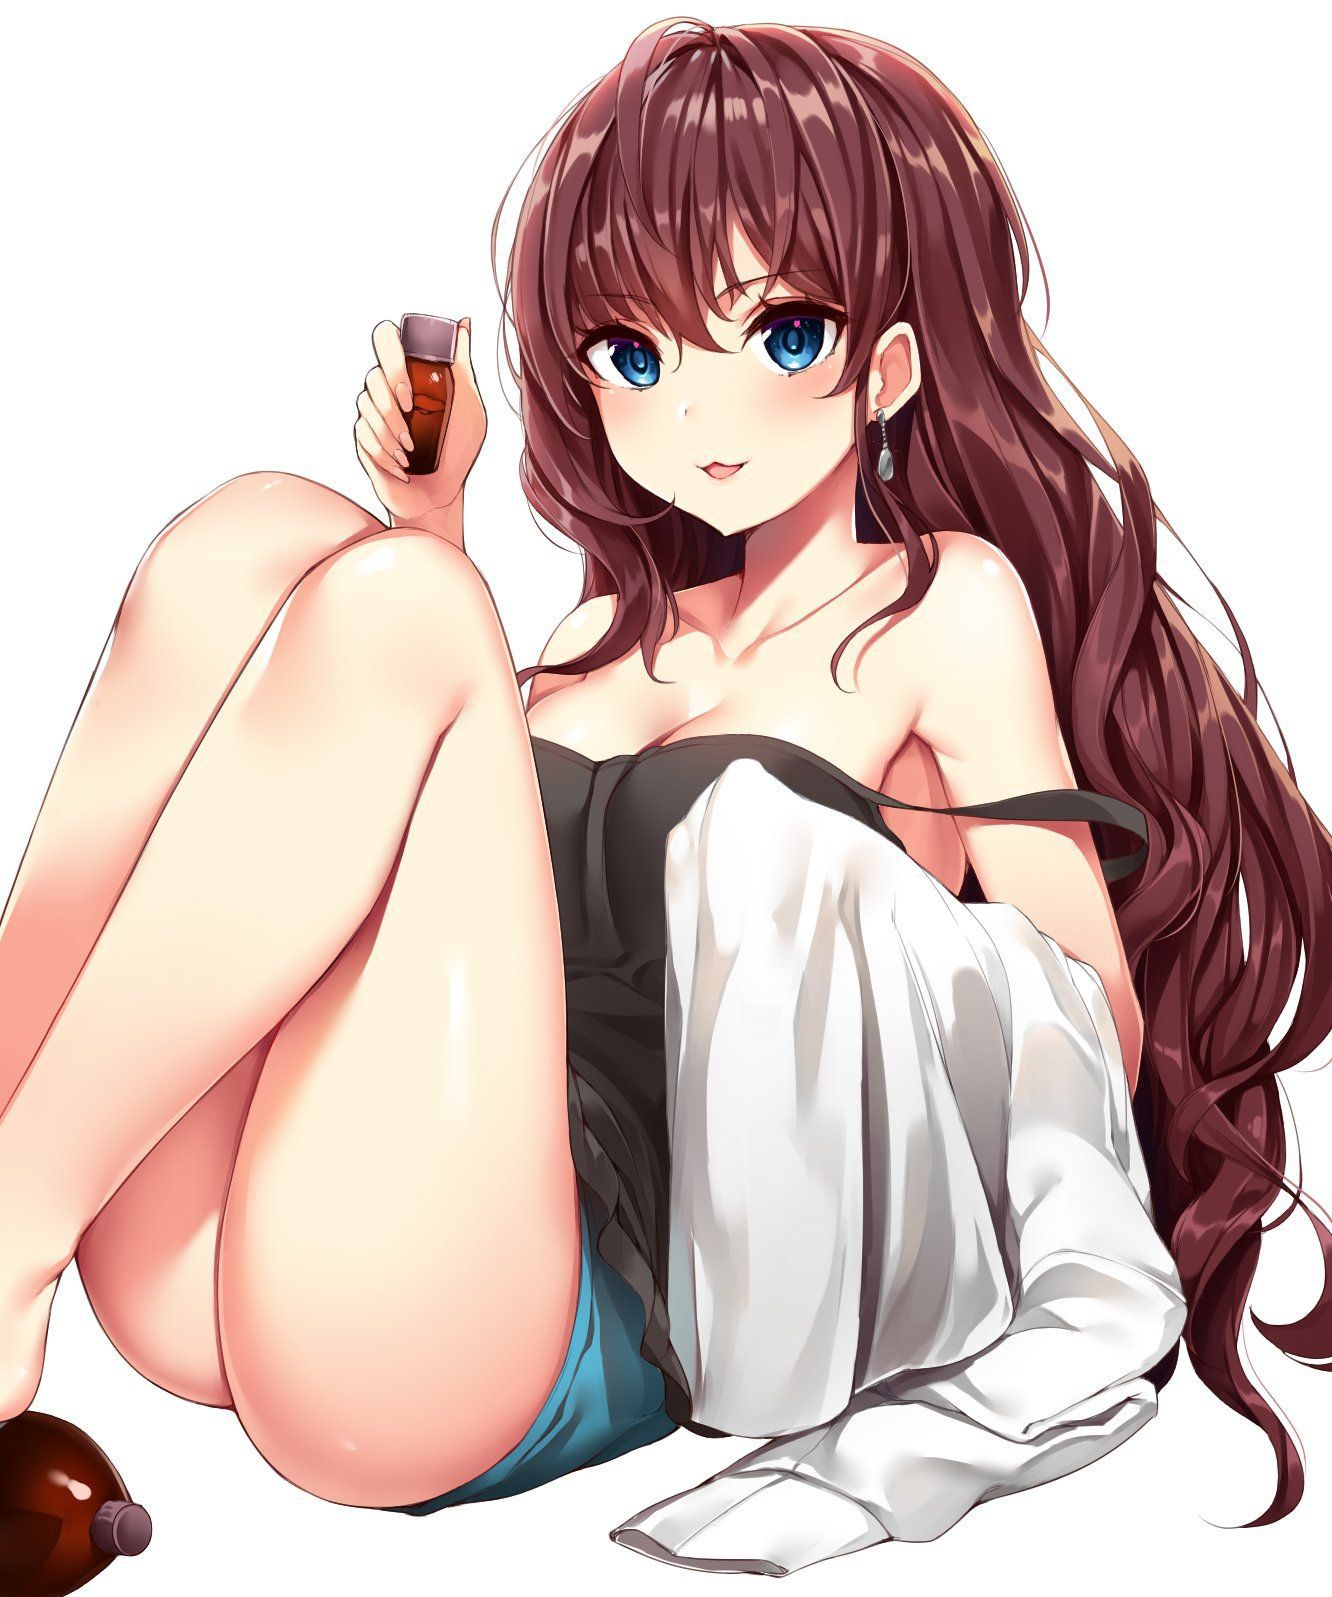 [Secondary, ZIP] smell fetish de mas, ichinose shiki cute picture summary 100 pieces 83